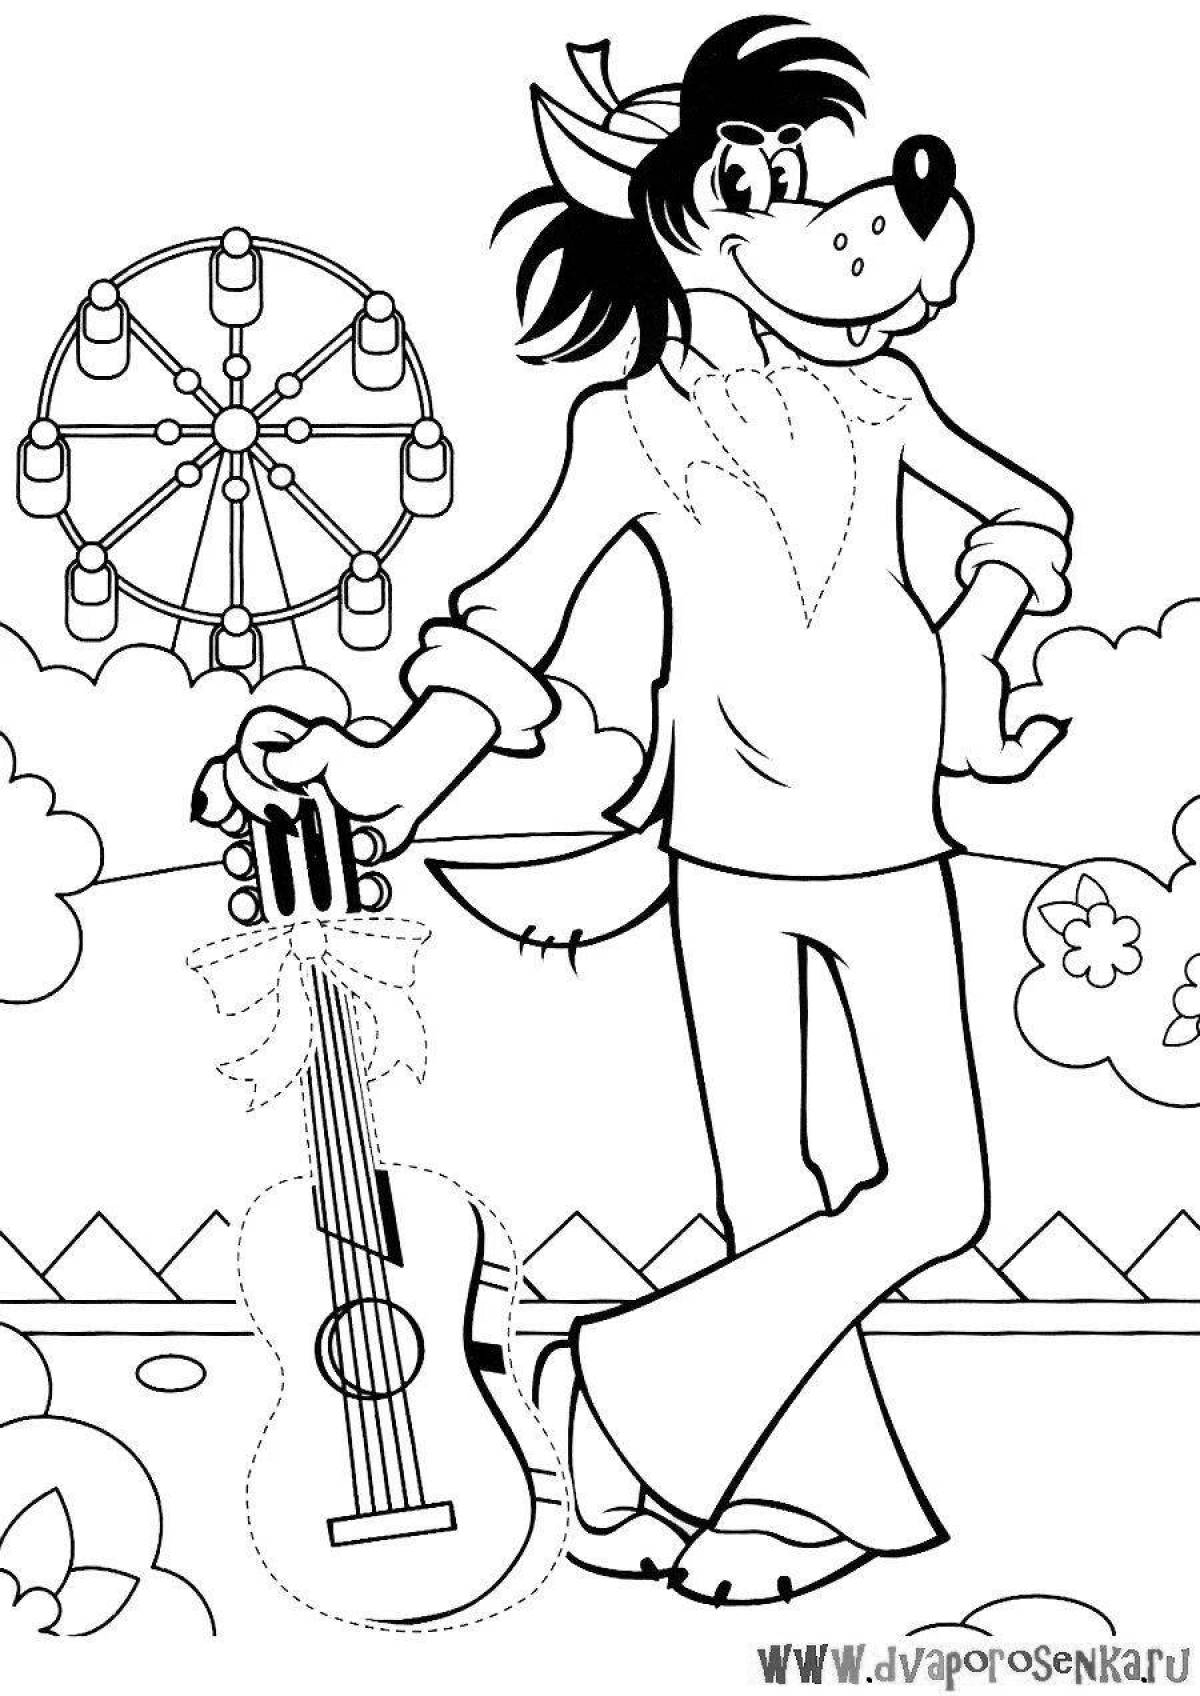 Fascinating coloring game oh wait game